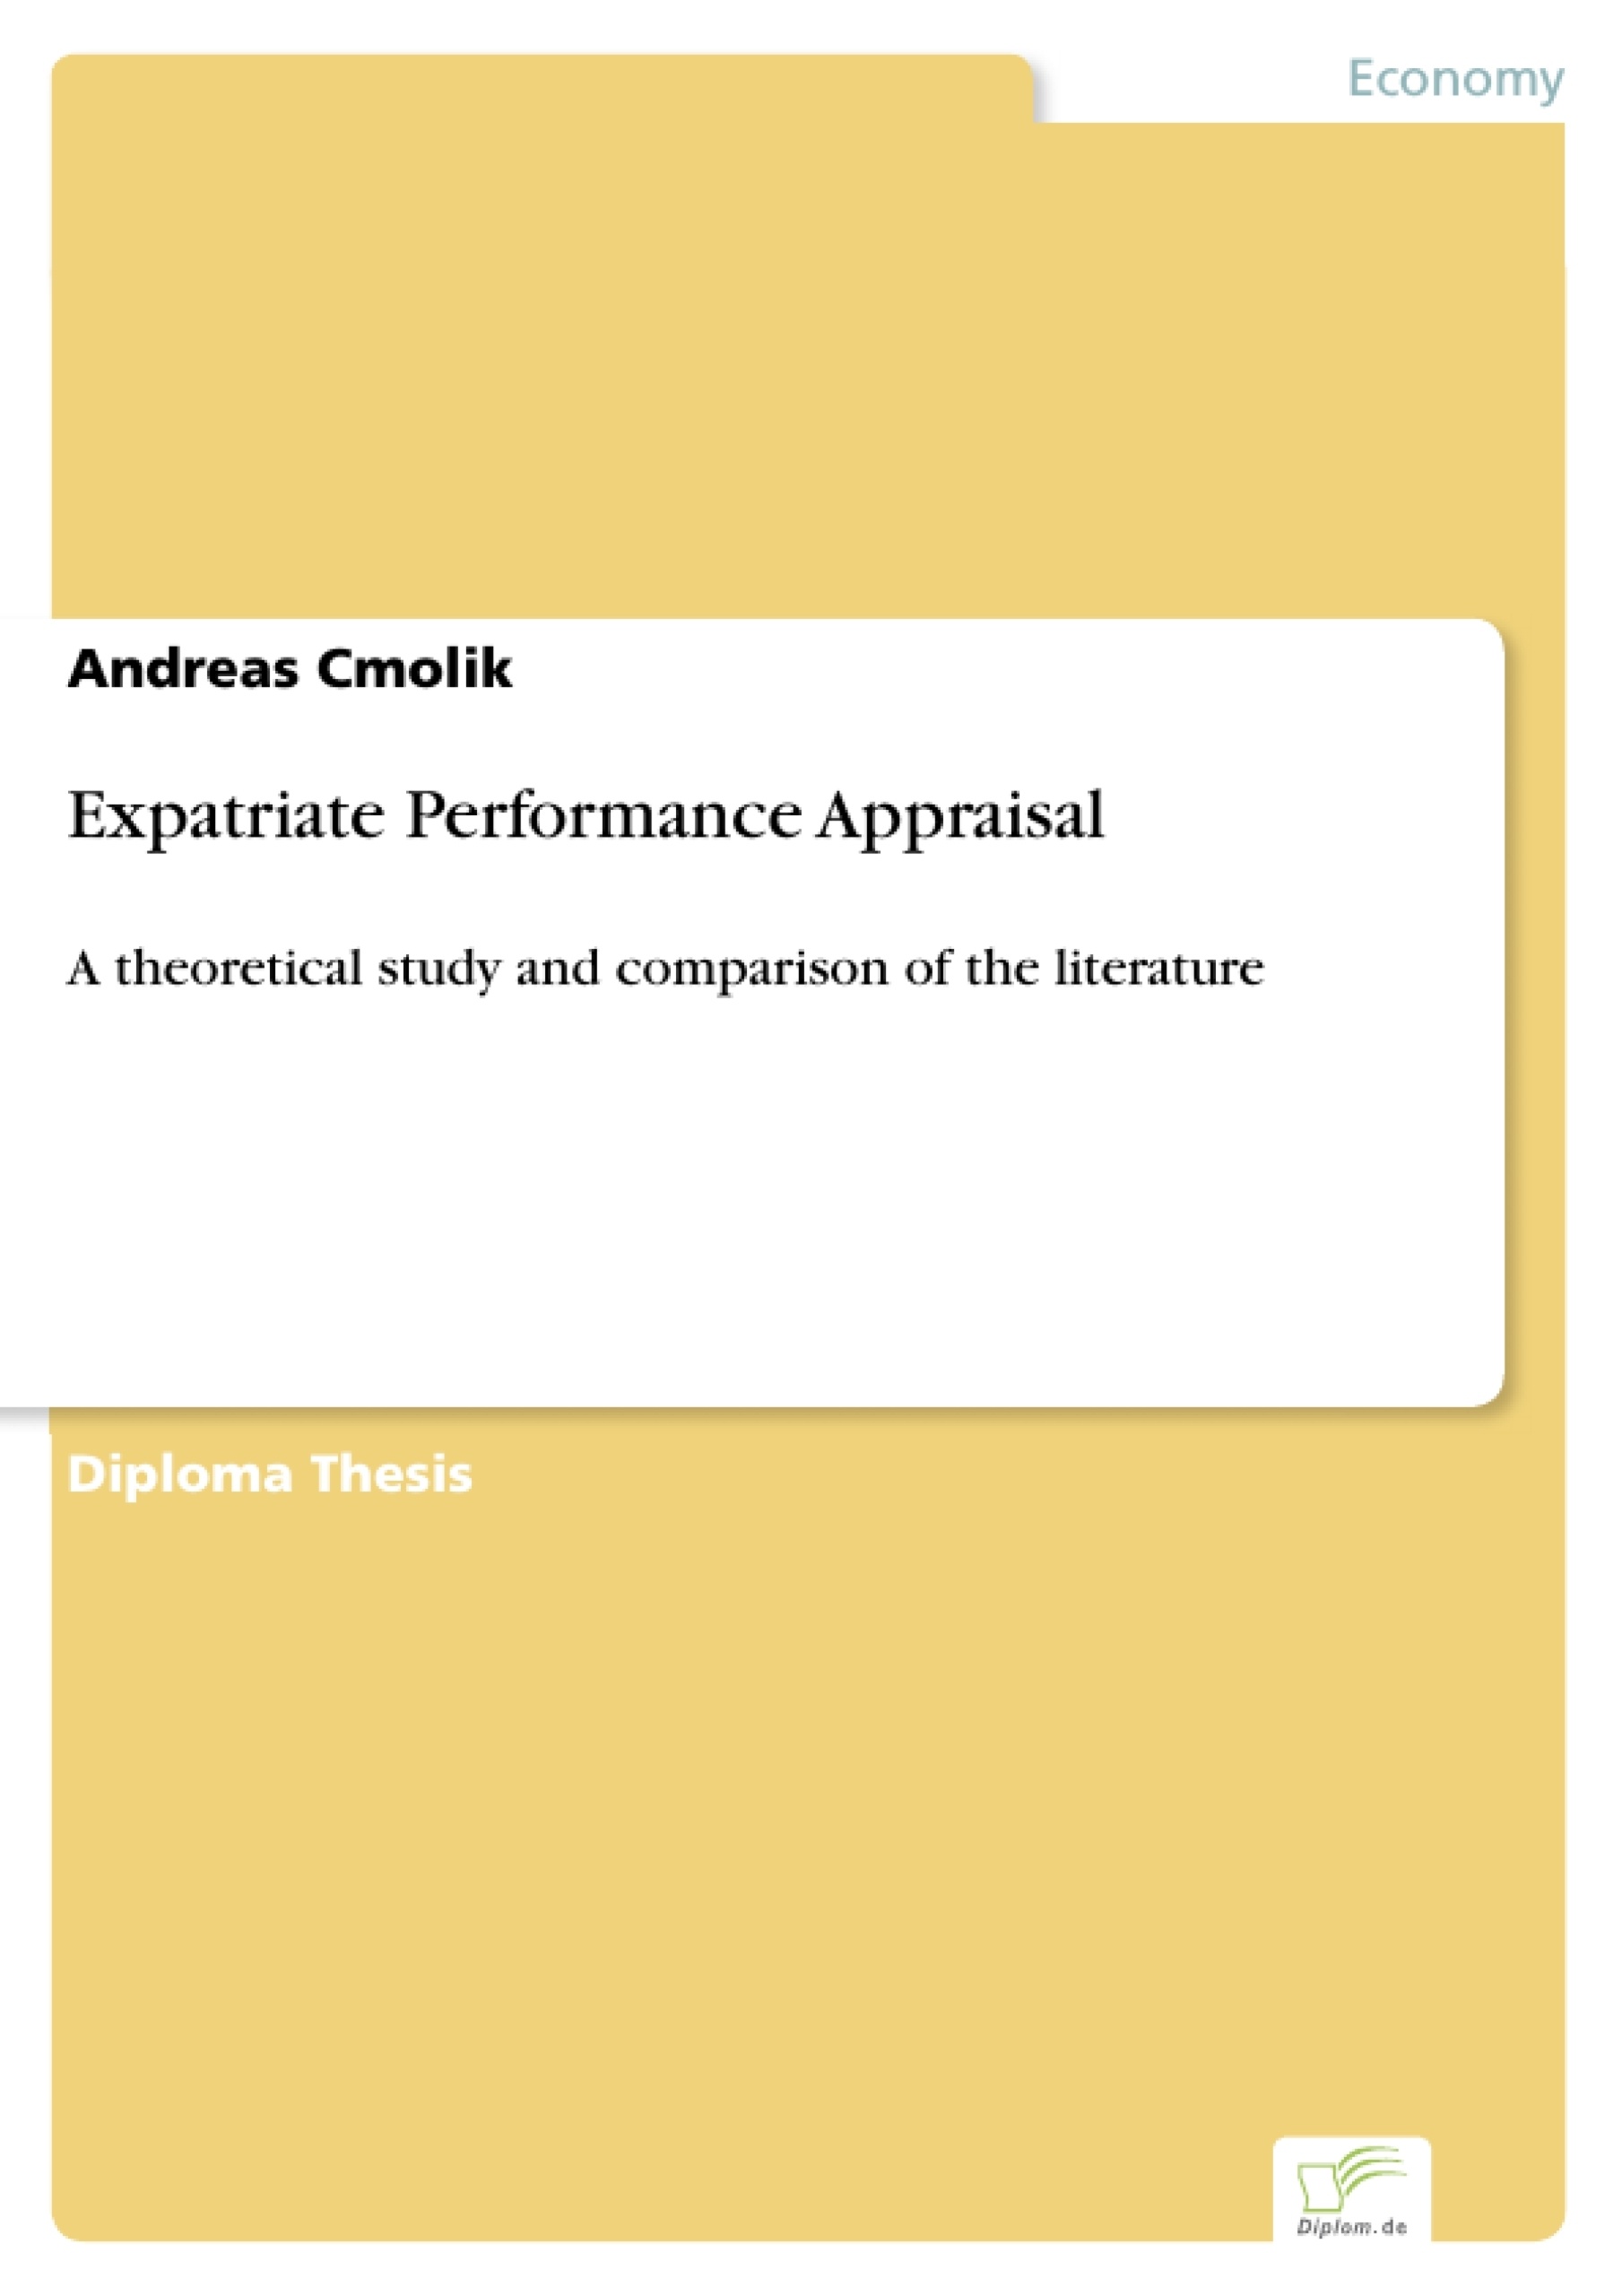 Literature review on performance appraisal system